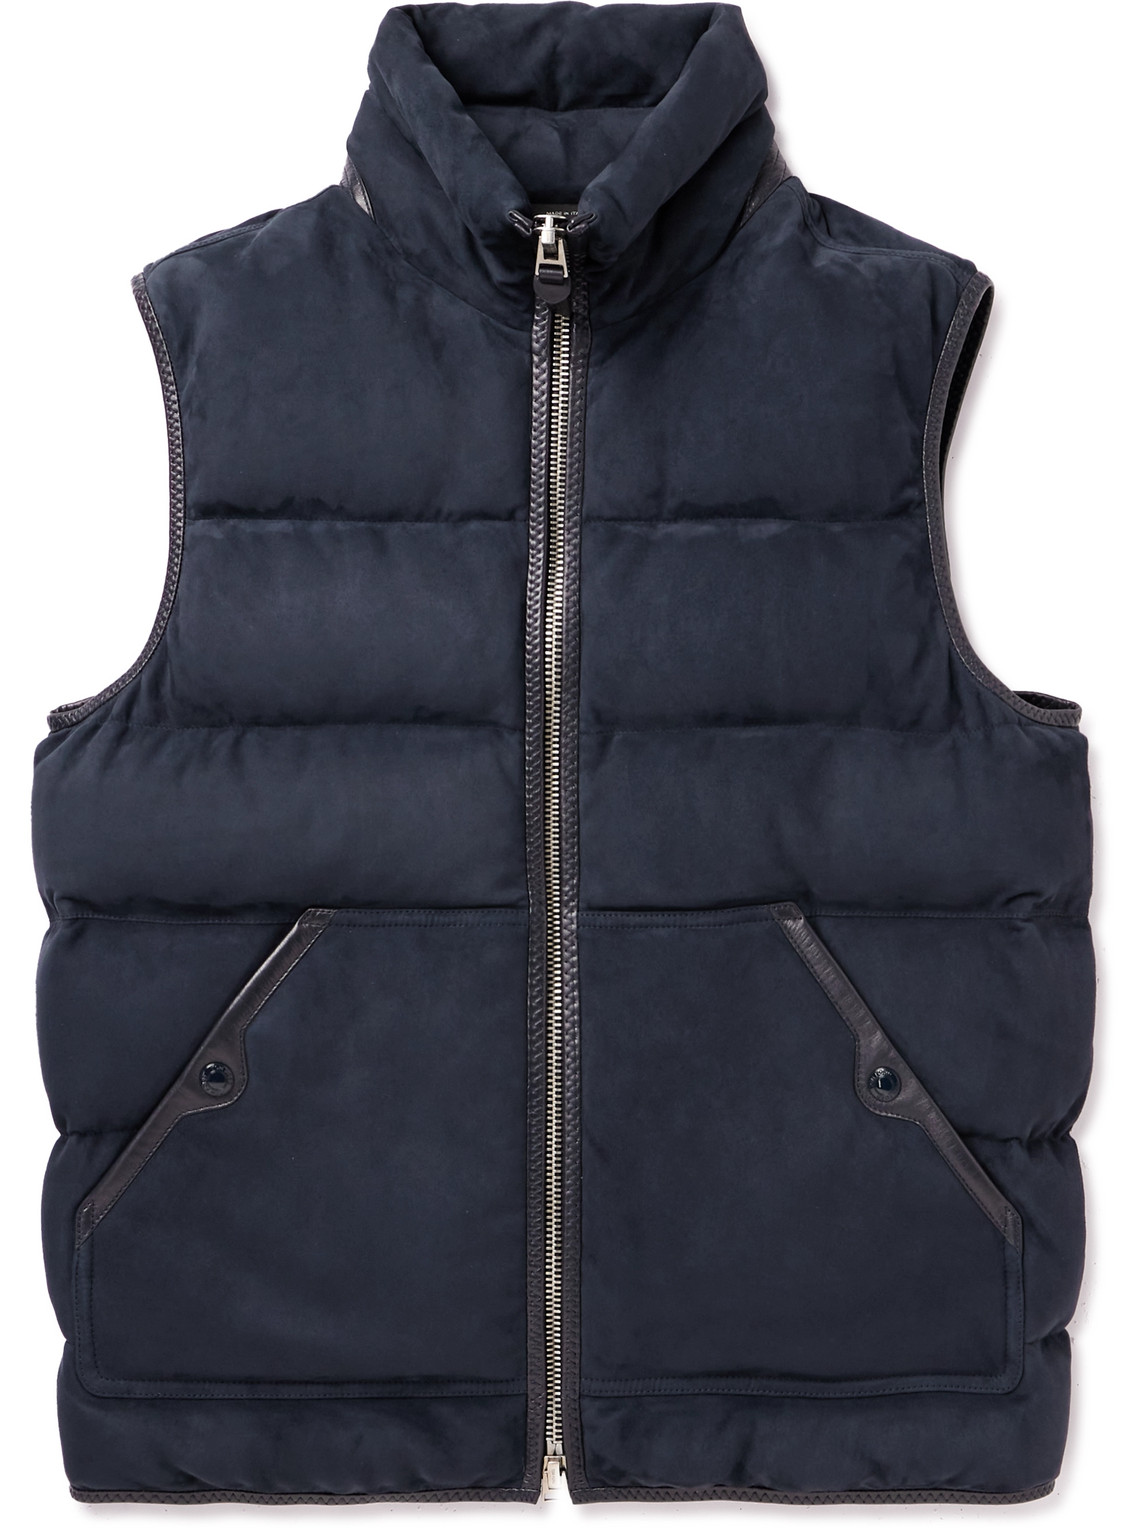 TOM FORD - Quilted Leather-Trimmed Suede Down Gilet - Men - Blue - IT 54 von TOM FORD